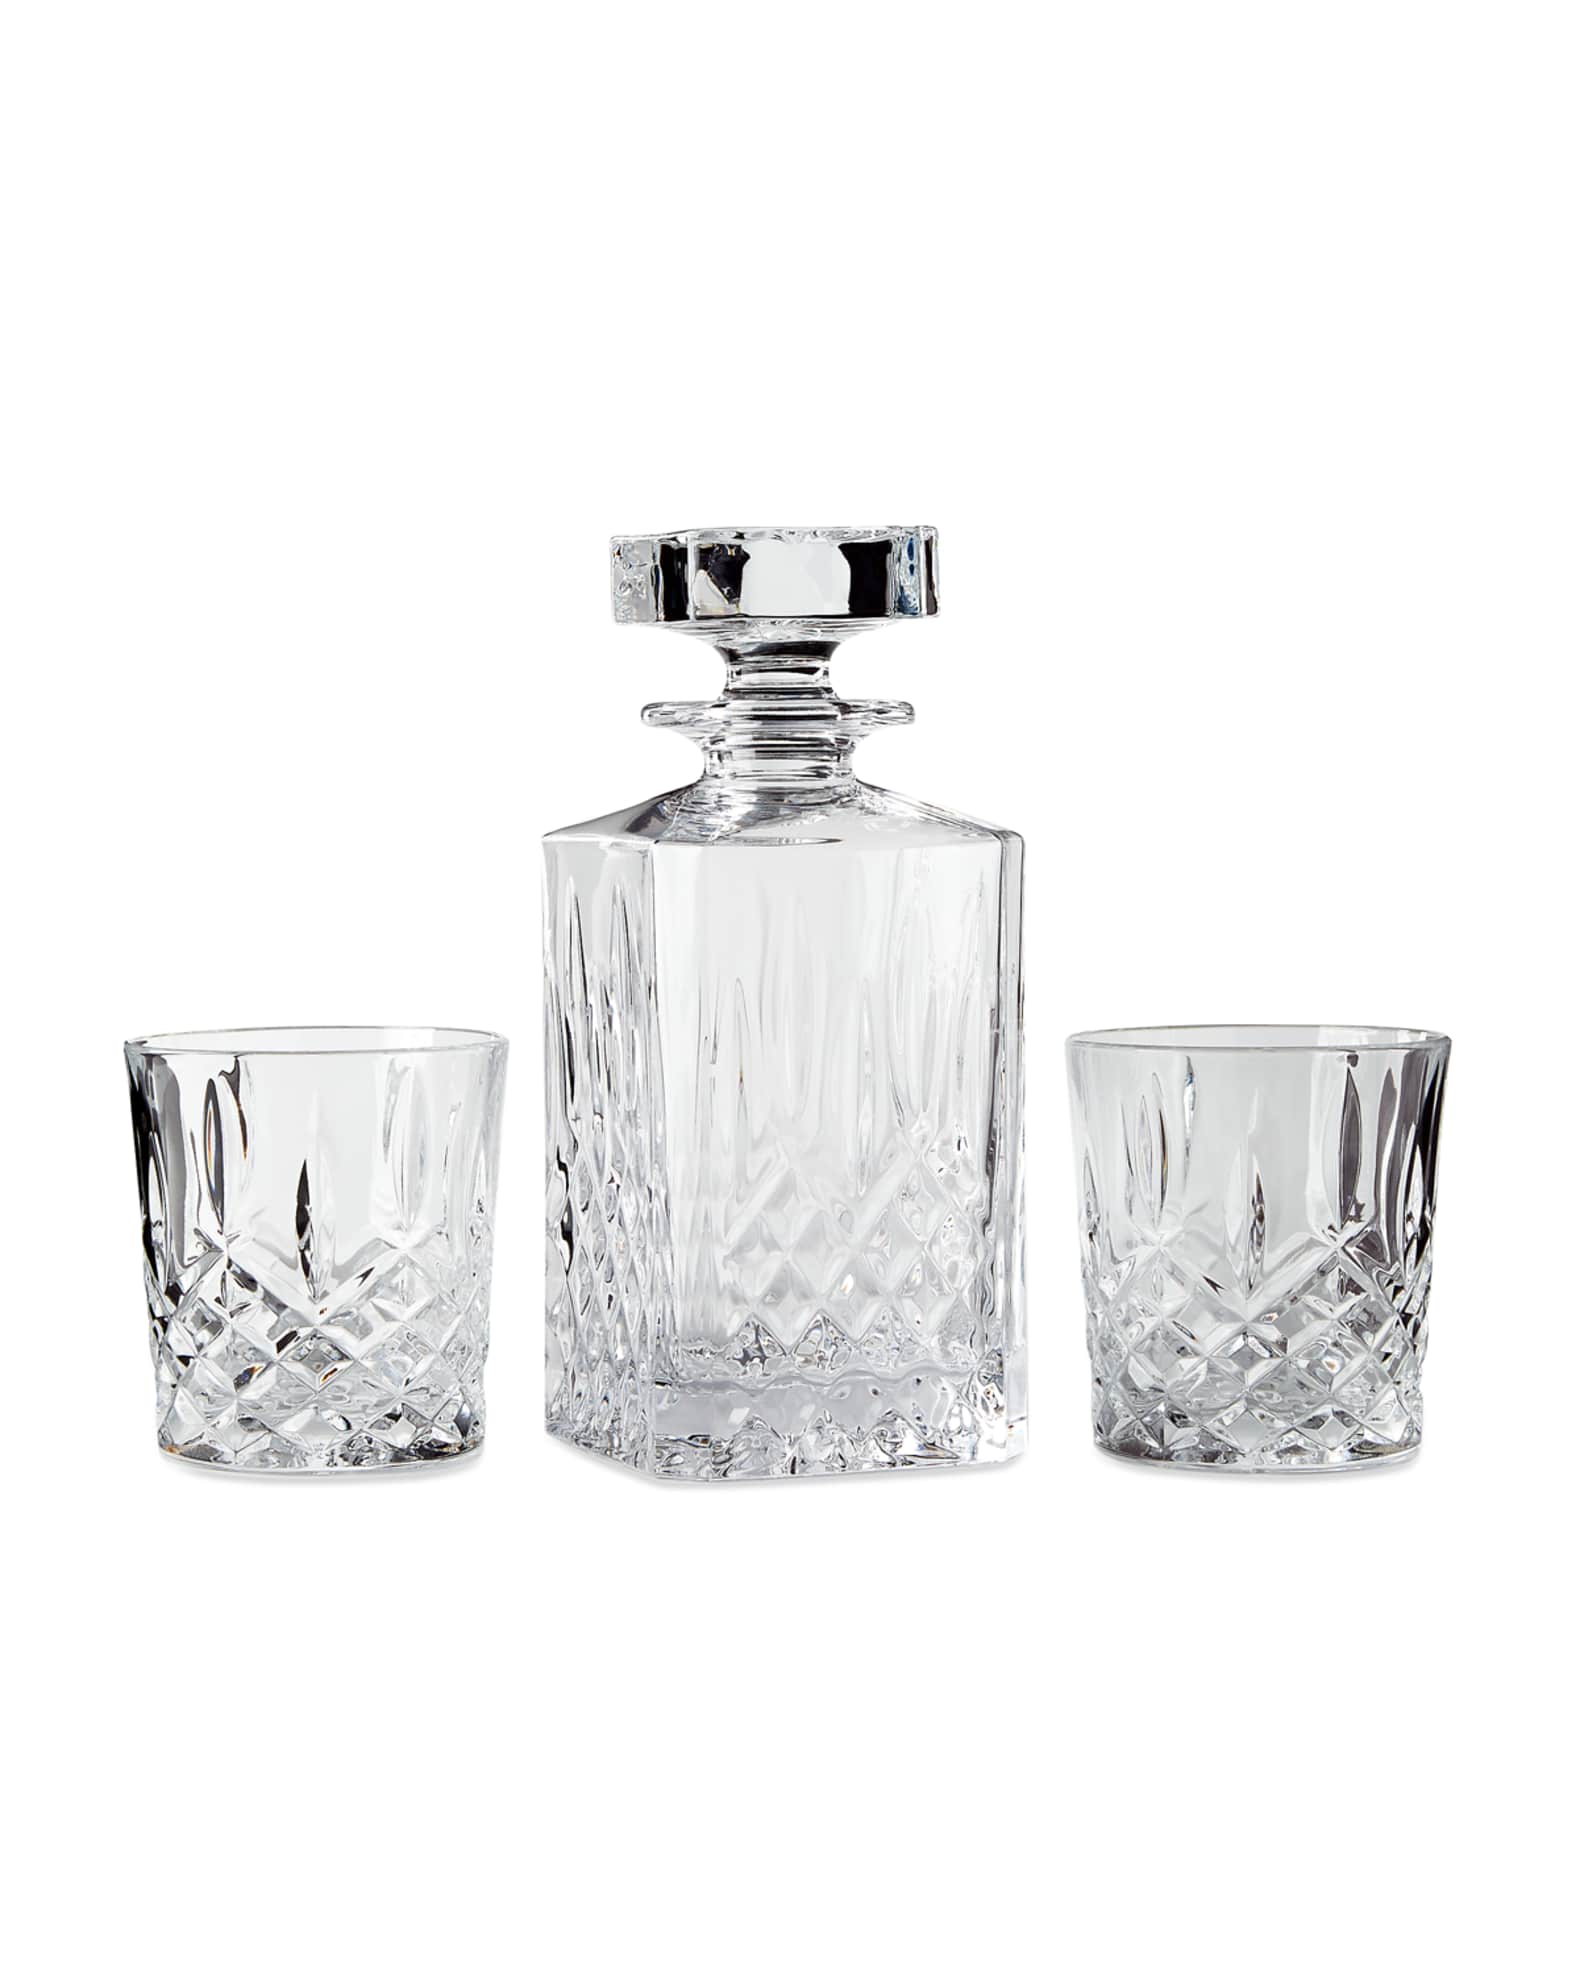 Marquis By Waterford Markham Square Decanter & Two Double Old-Fashioned Glasses